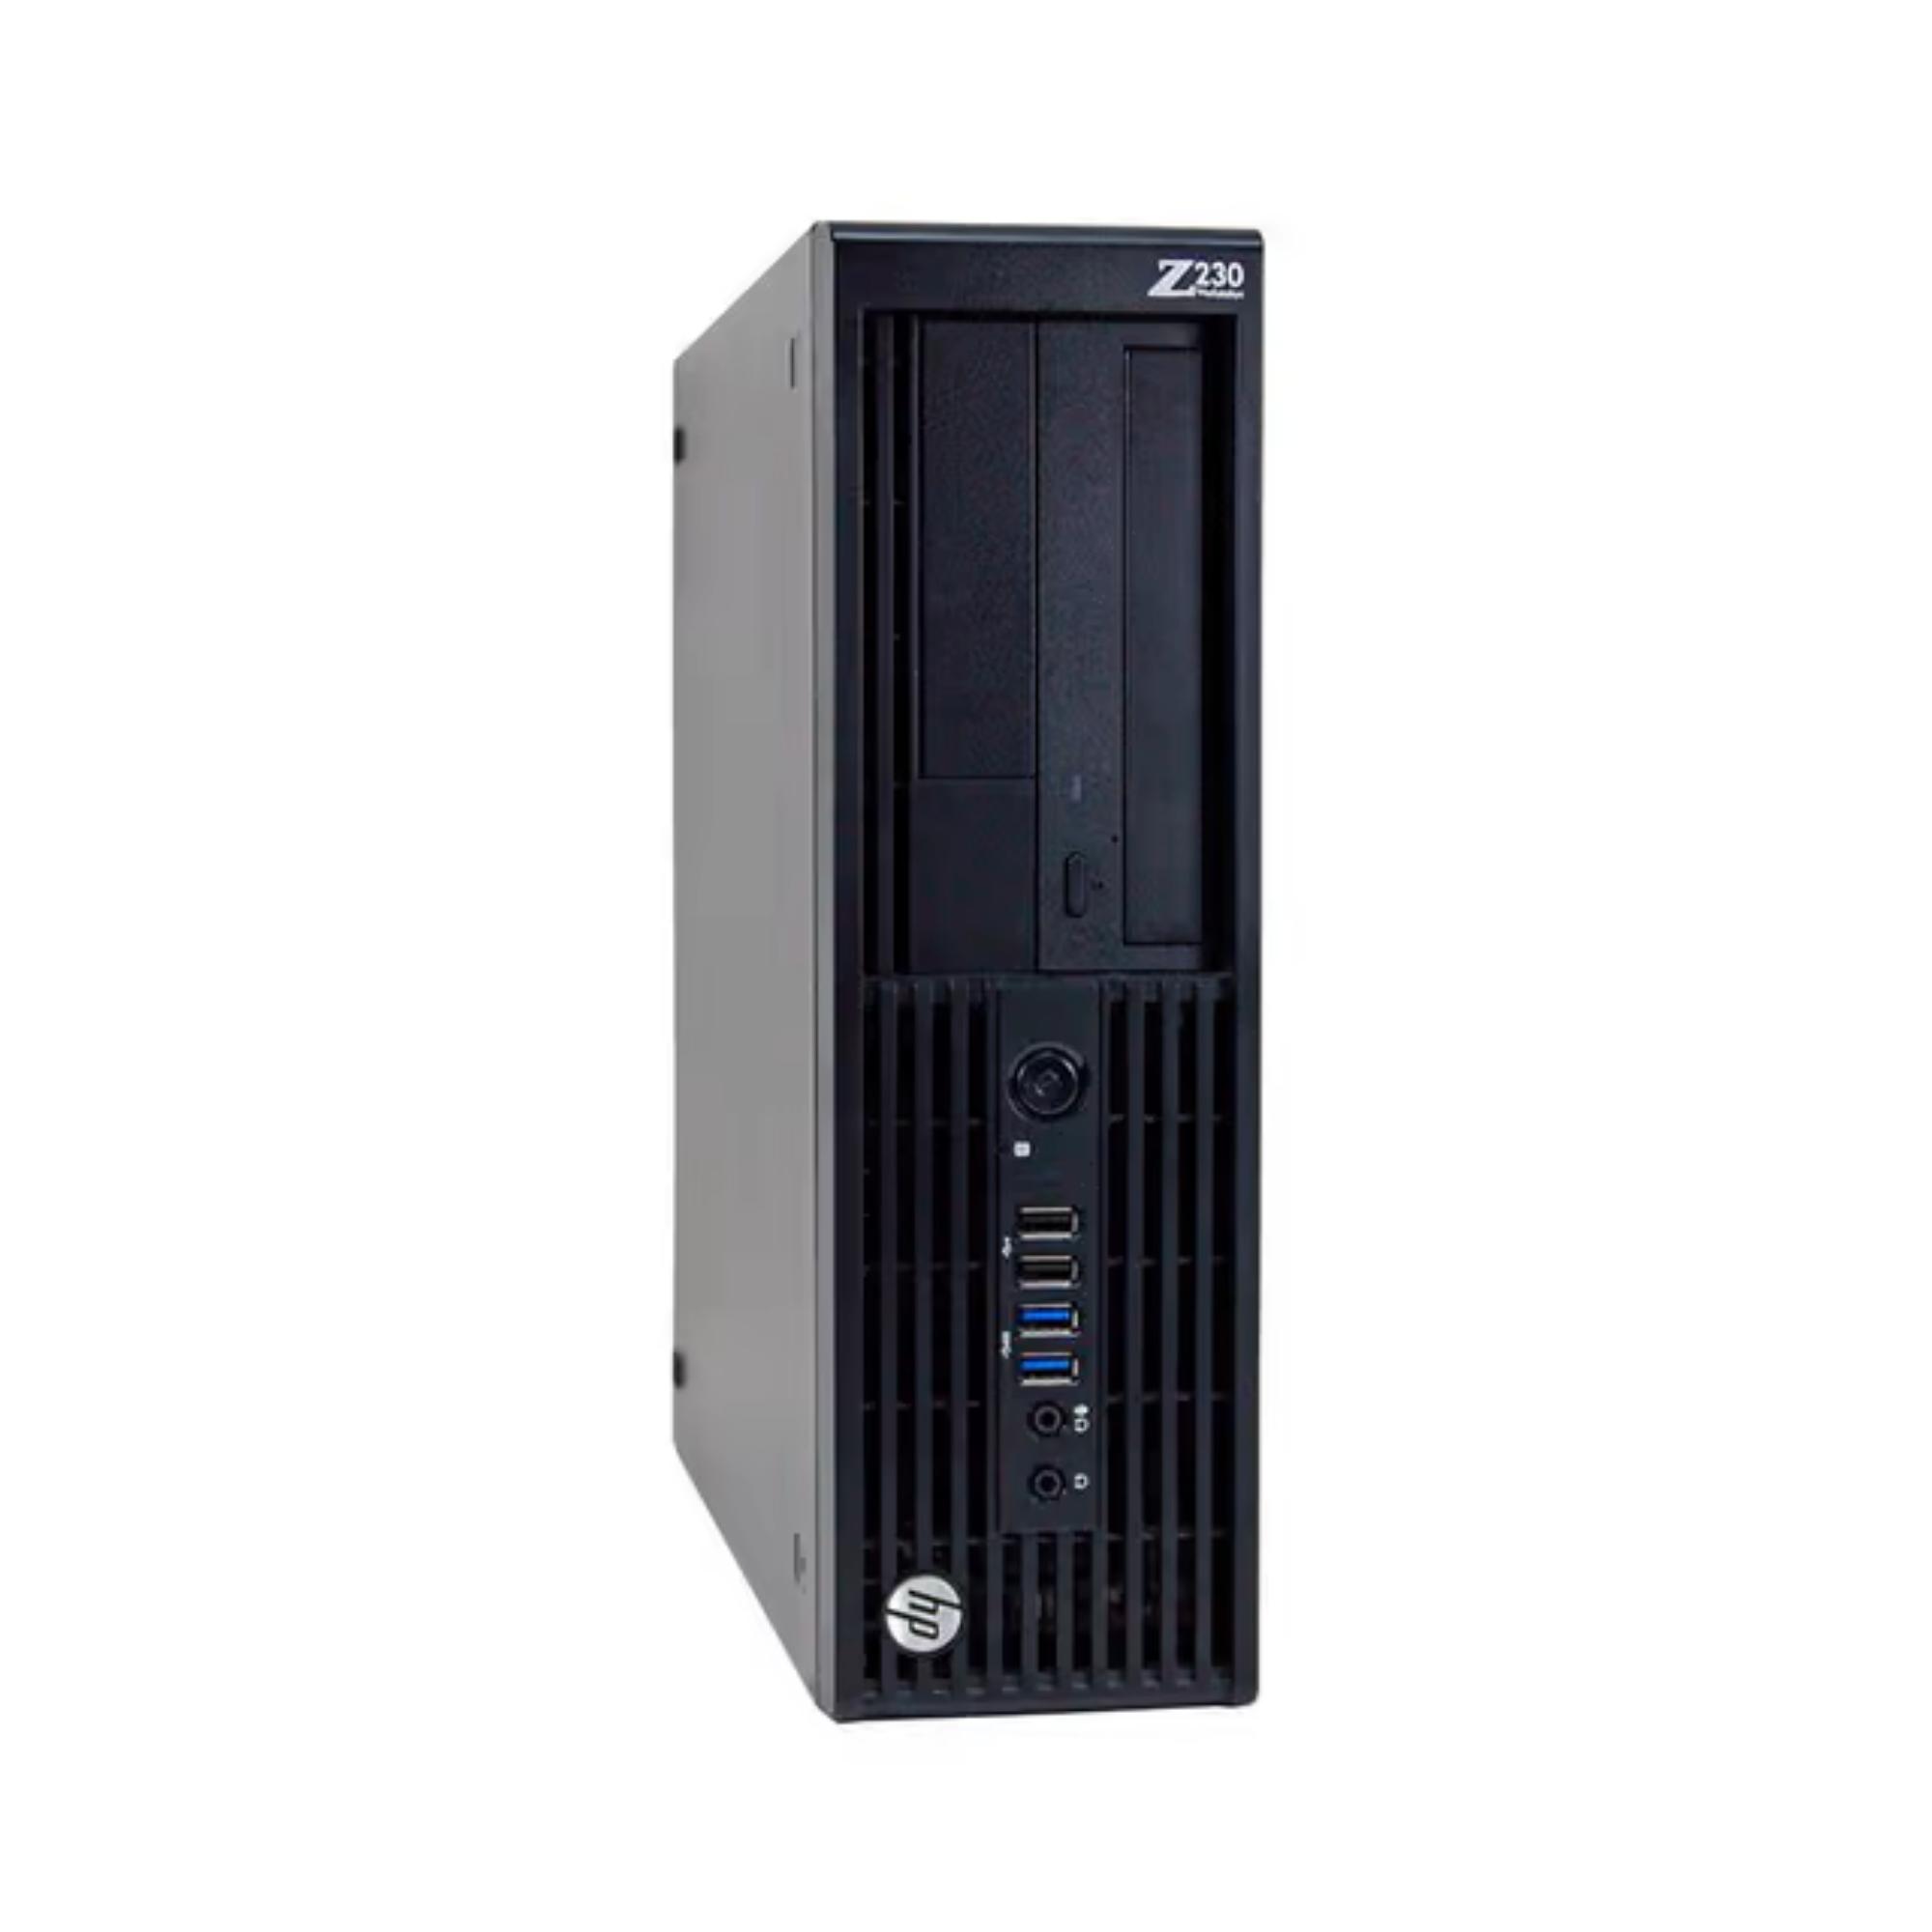 Tower – HP Z230 SFF / INTEL PENTIUM / 1TB HDD 3.5 / 8GB / INTEL HD / W10P – Z230SFF1-X41-08<br><br><span STYLE="background:#39ac37;"><font color="white"> DISPONIBILE </font></span>